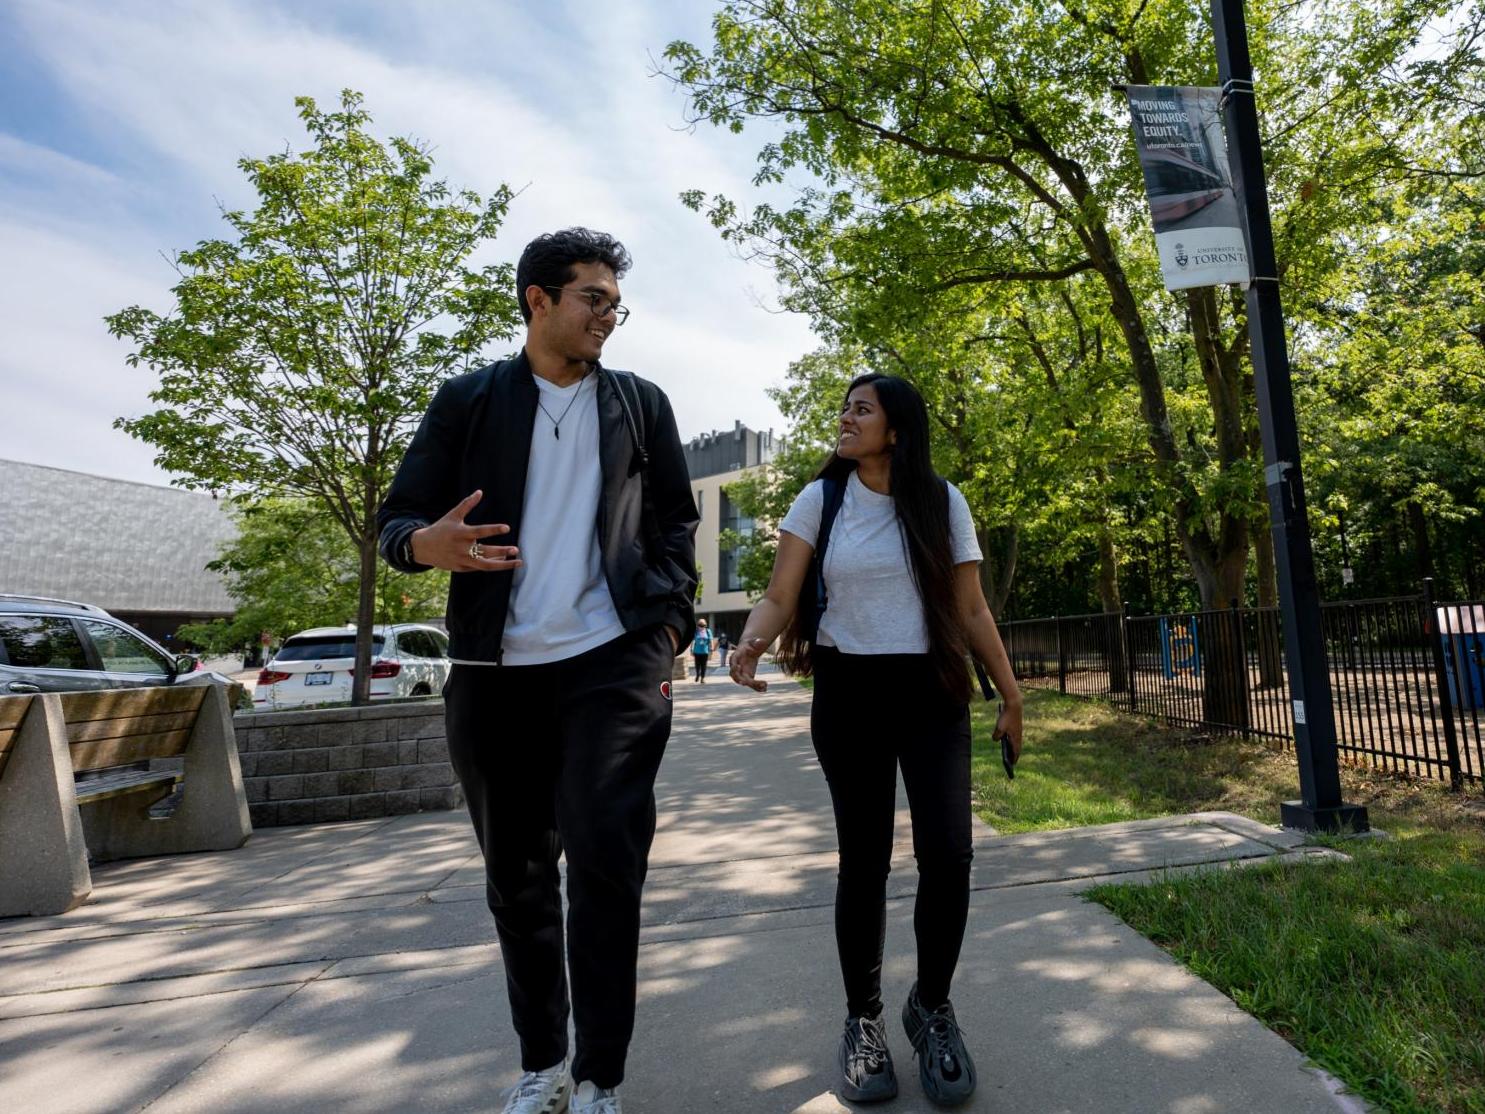 Two students chatting while walking on campus